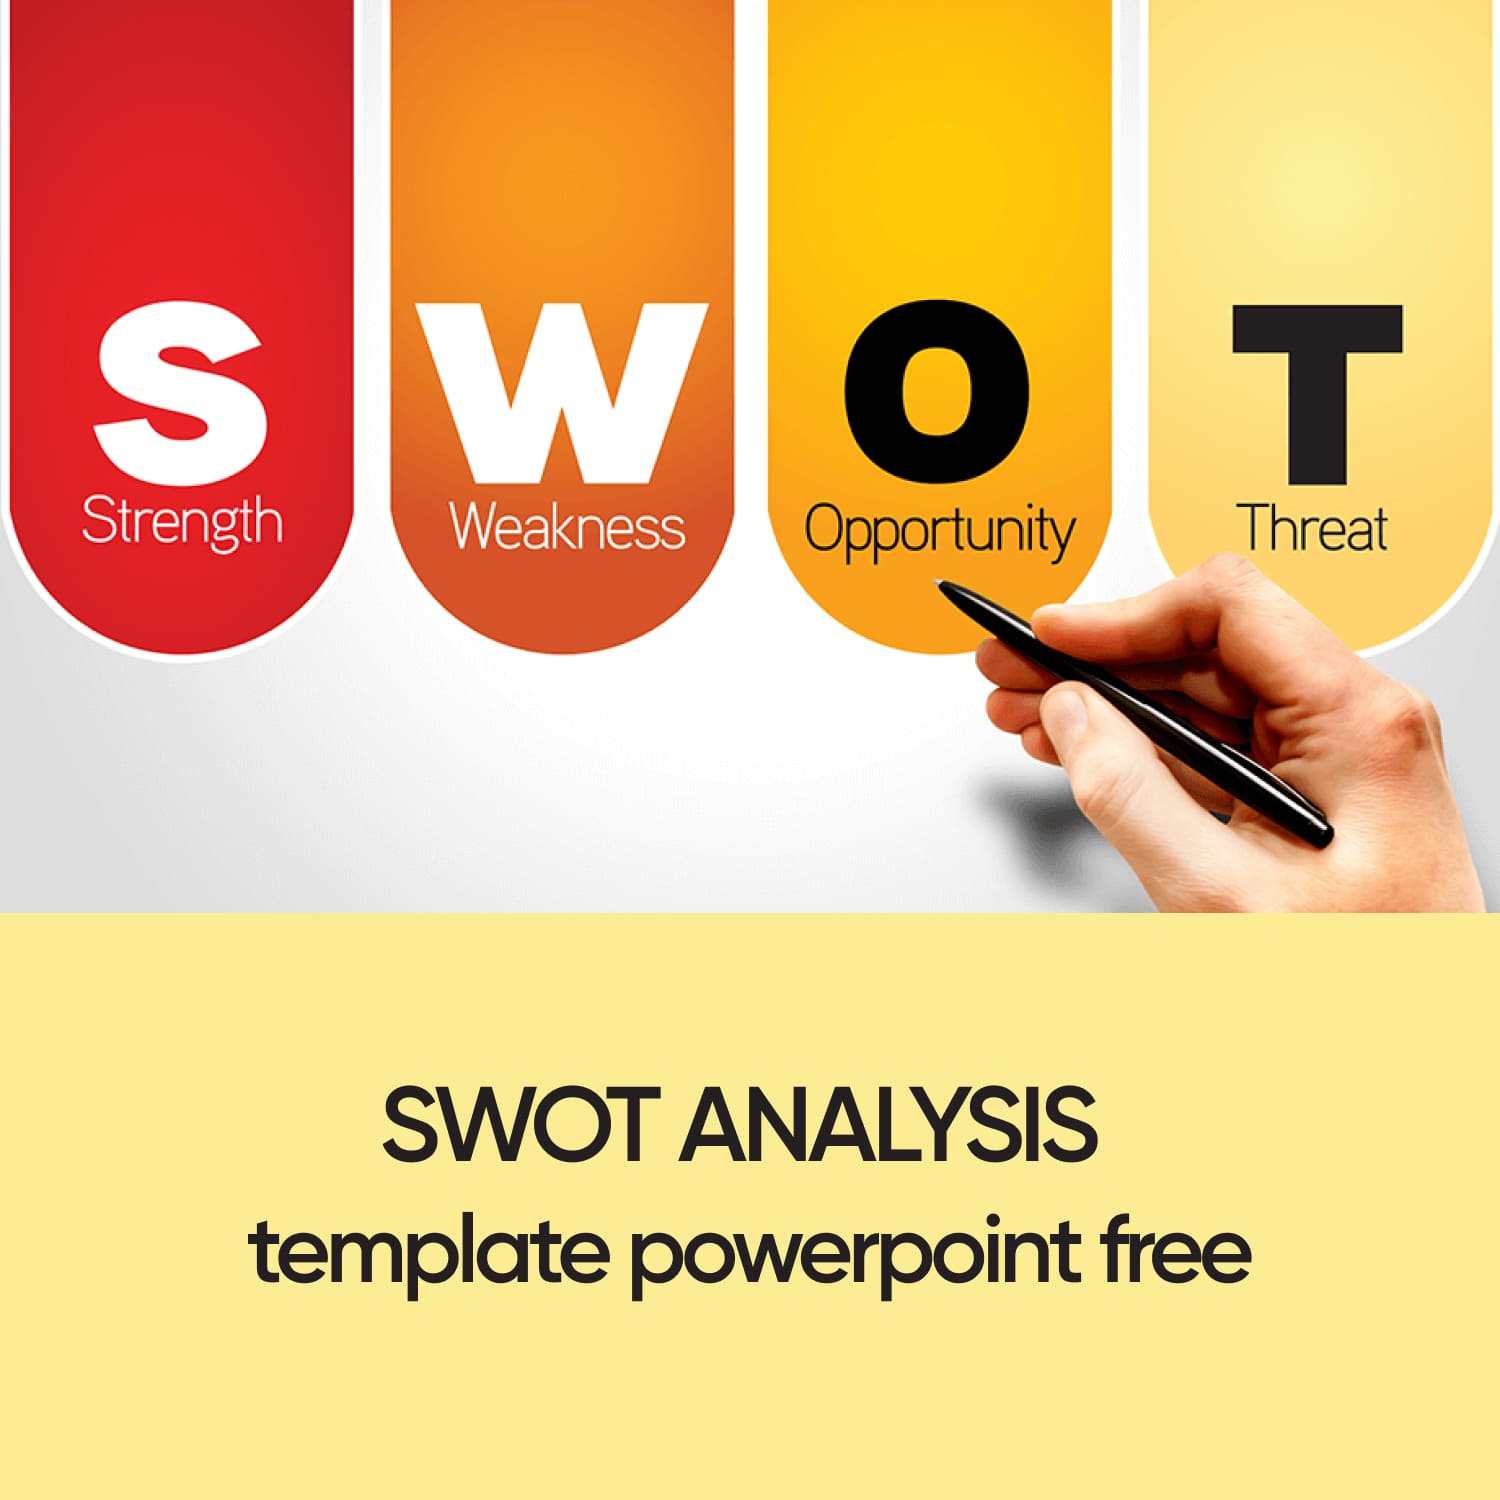 Images with SWOT Analysis Template Powerpoint.